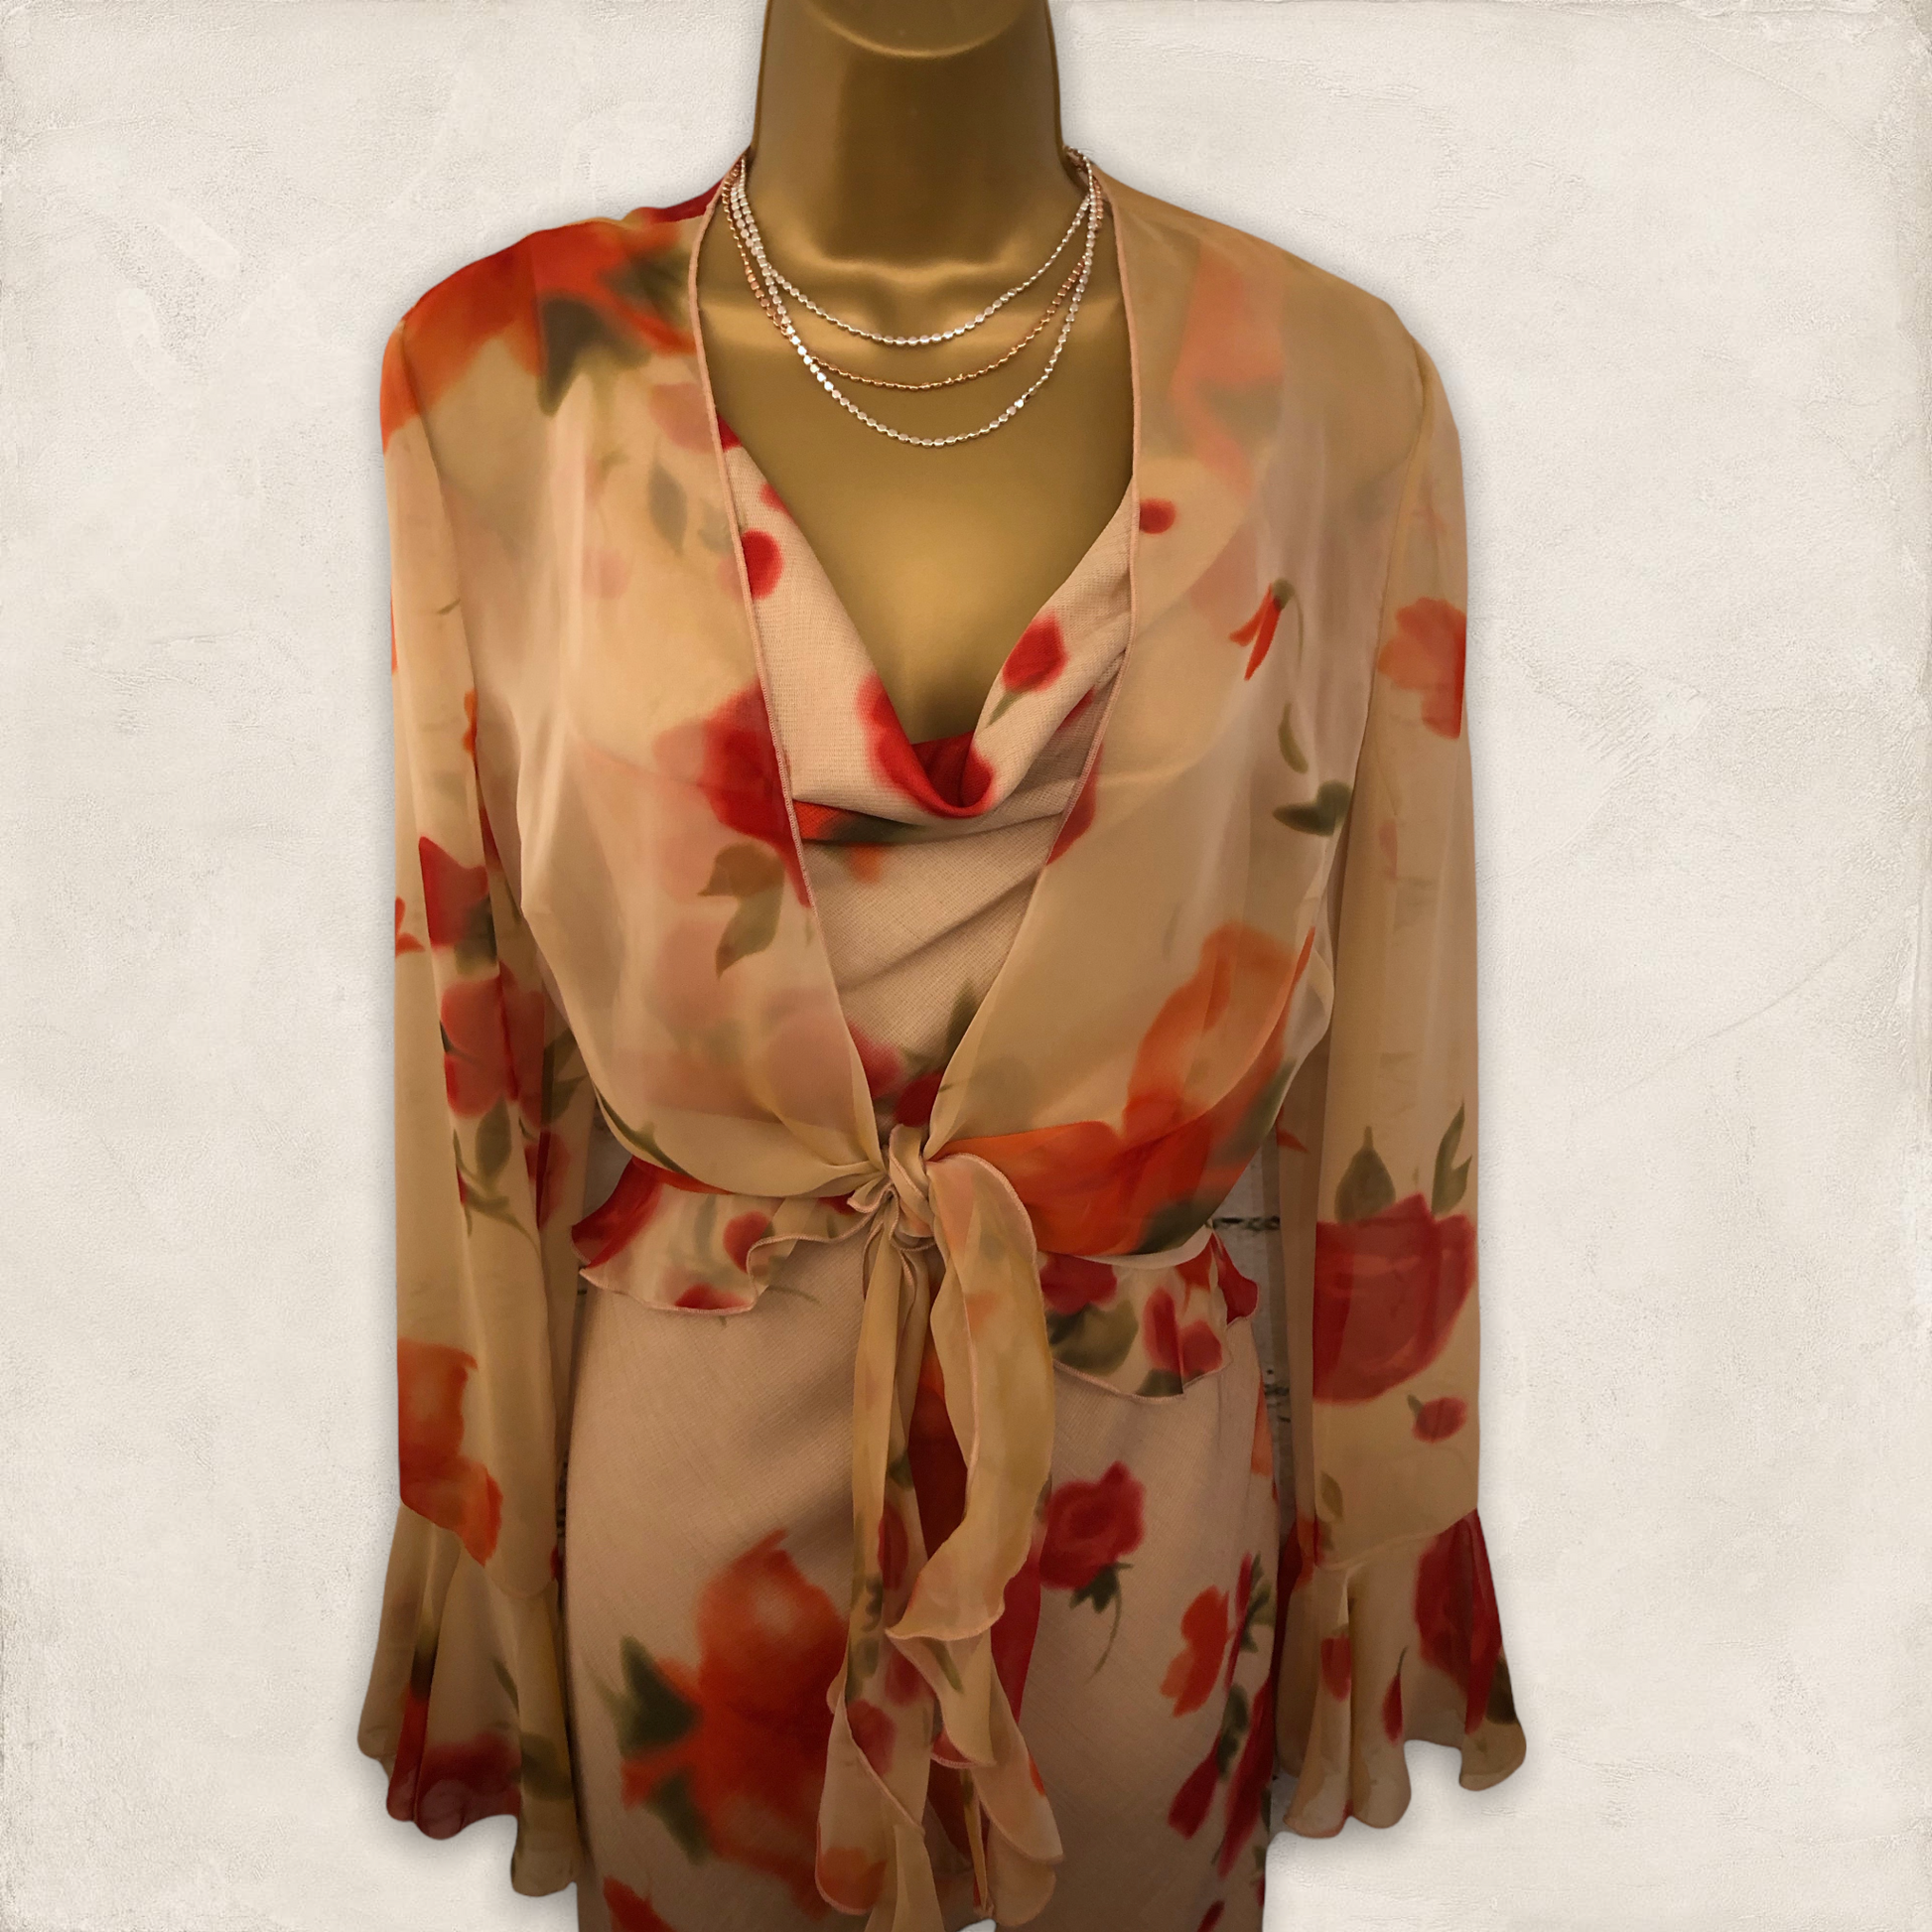 Chrystiano Beige & Red Floral Special Occasion Outfit UK 12 US 8 EU 40 BNWT RRP £295 Timeless Fashions